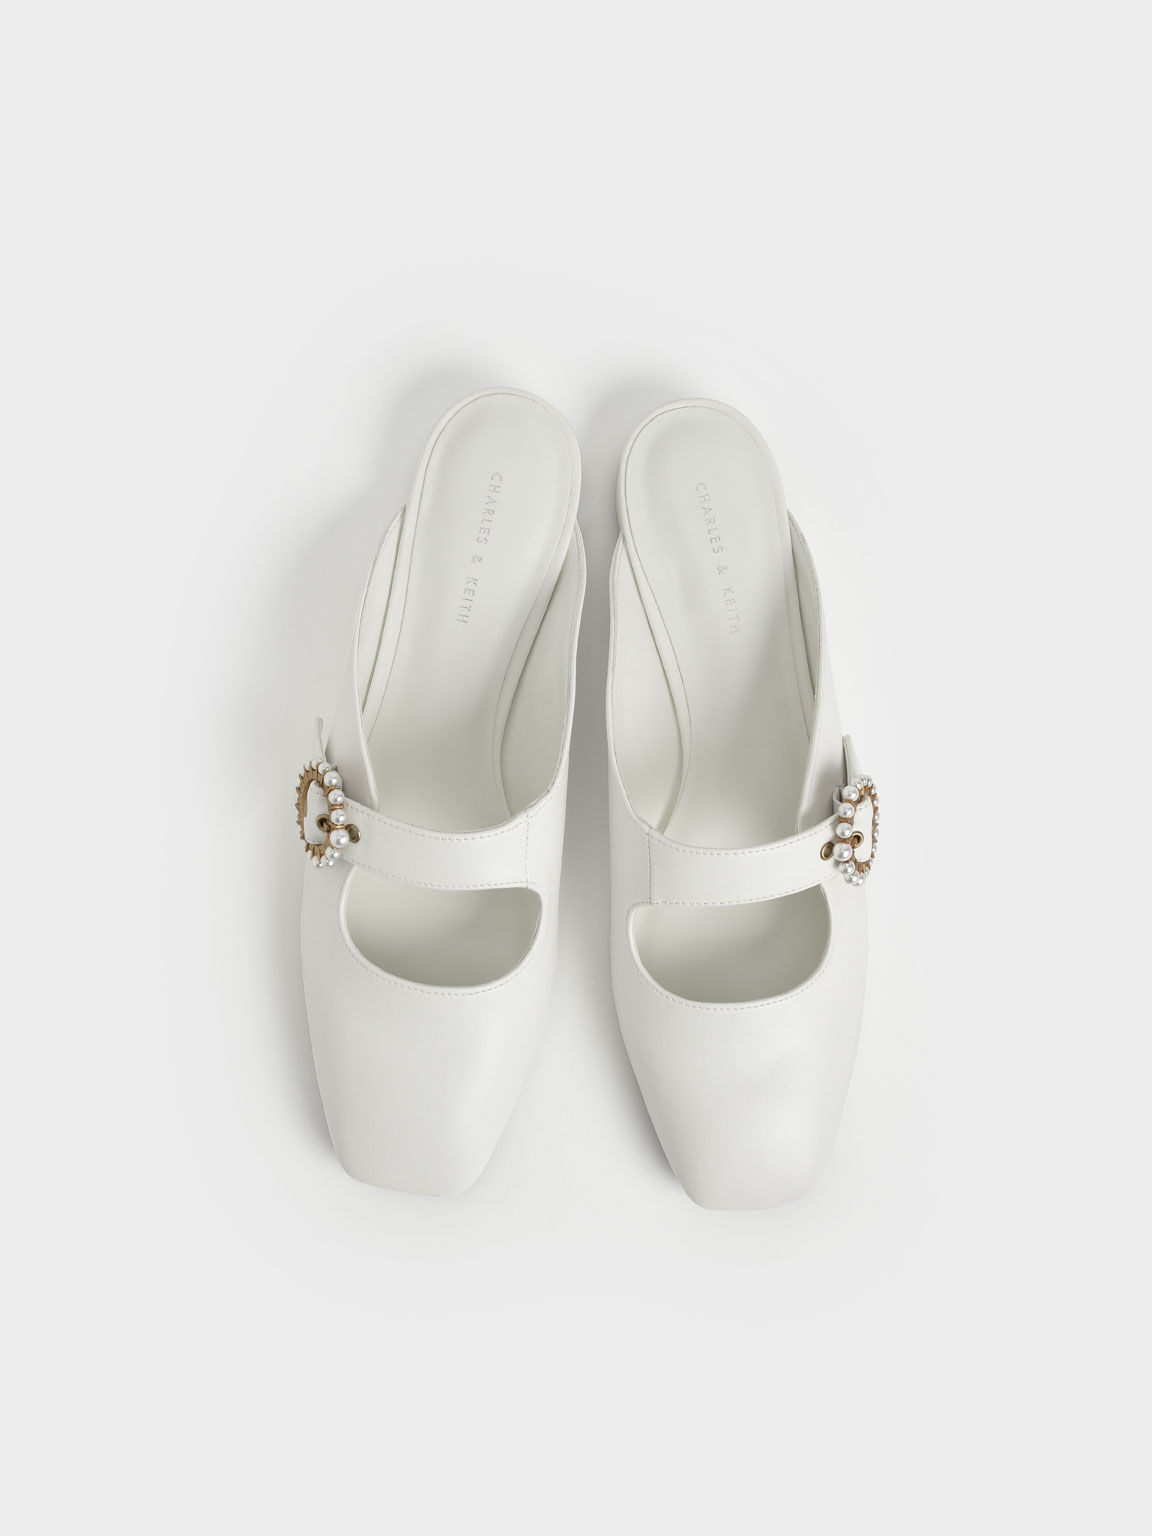 Beaded Buckle Mules, White, hi-res